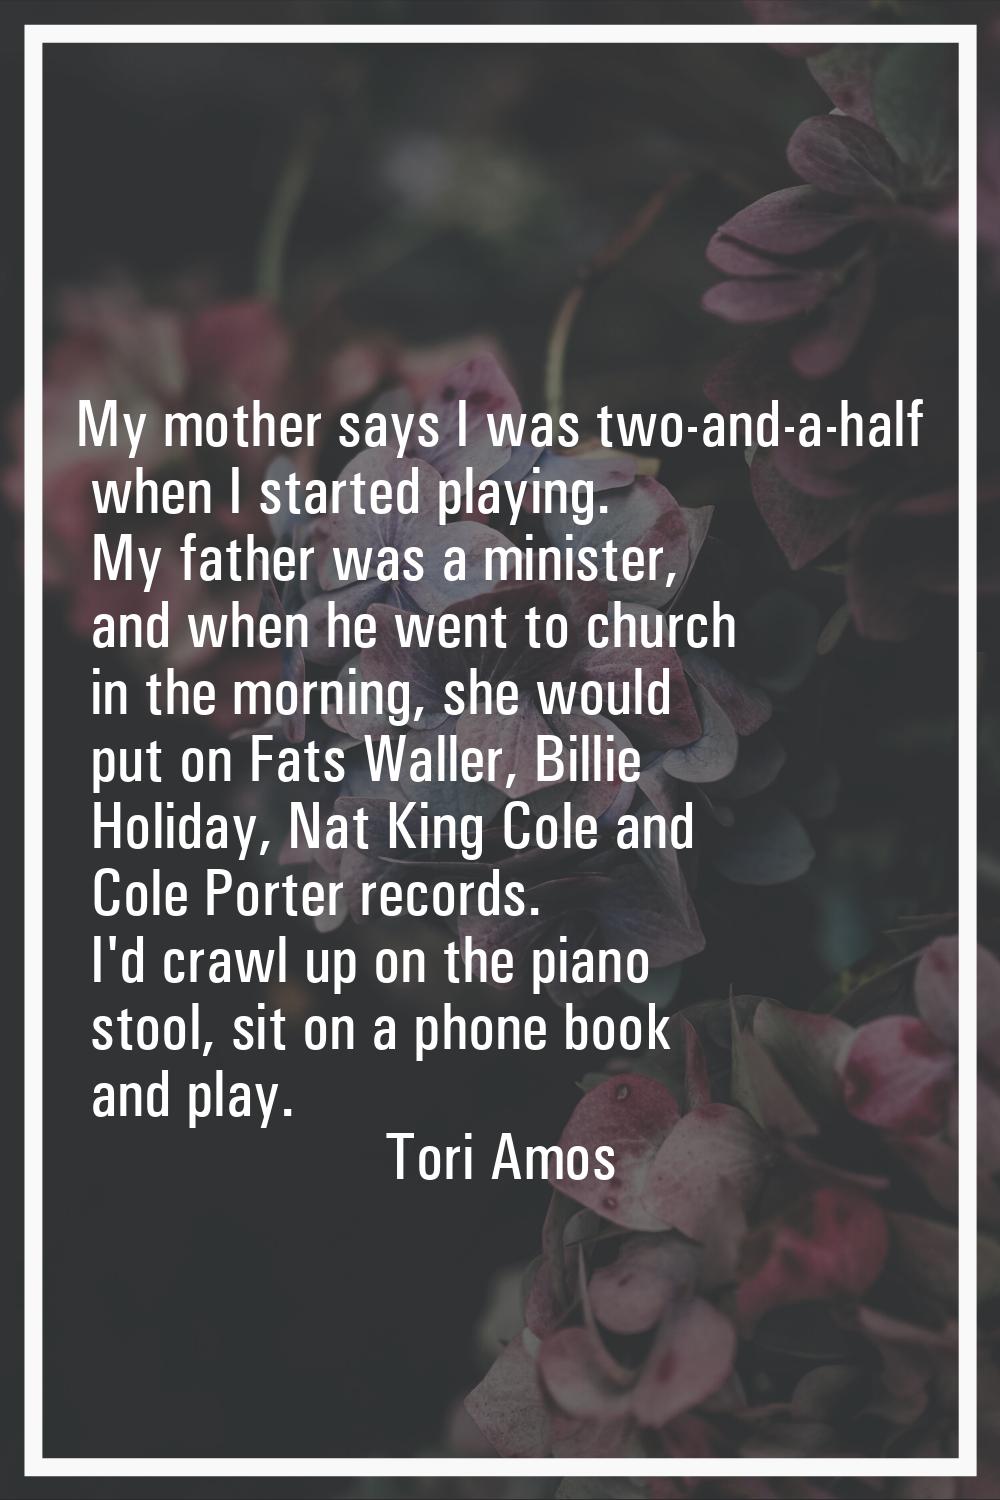 My mother says I was two-and-a-half when I started playing. My father was a minister, and when he w